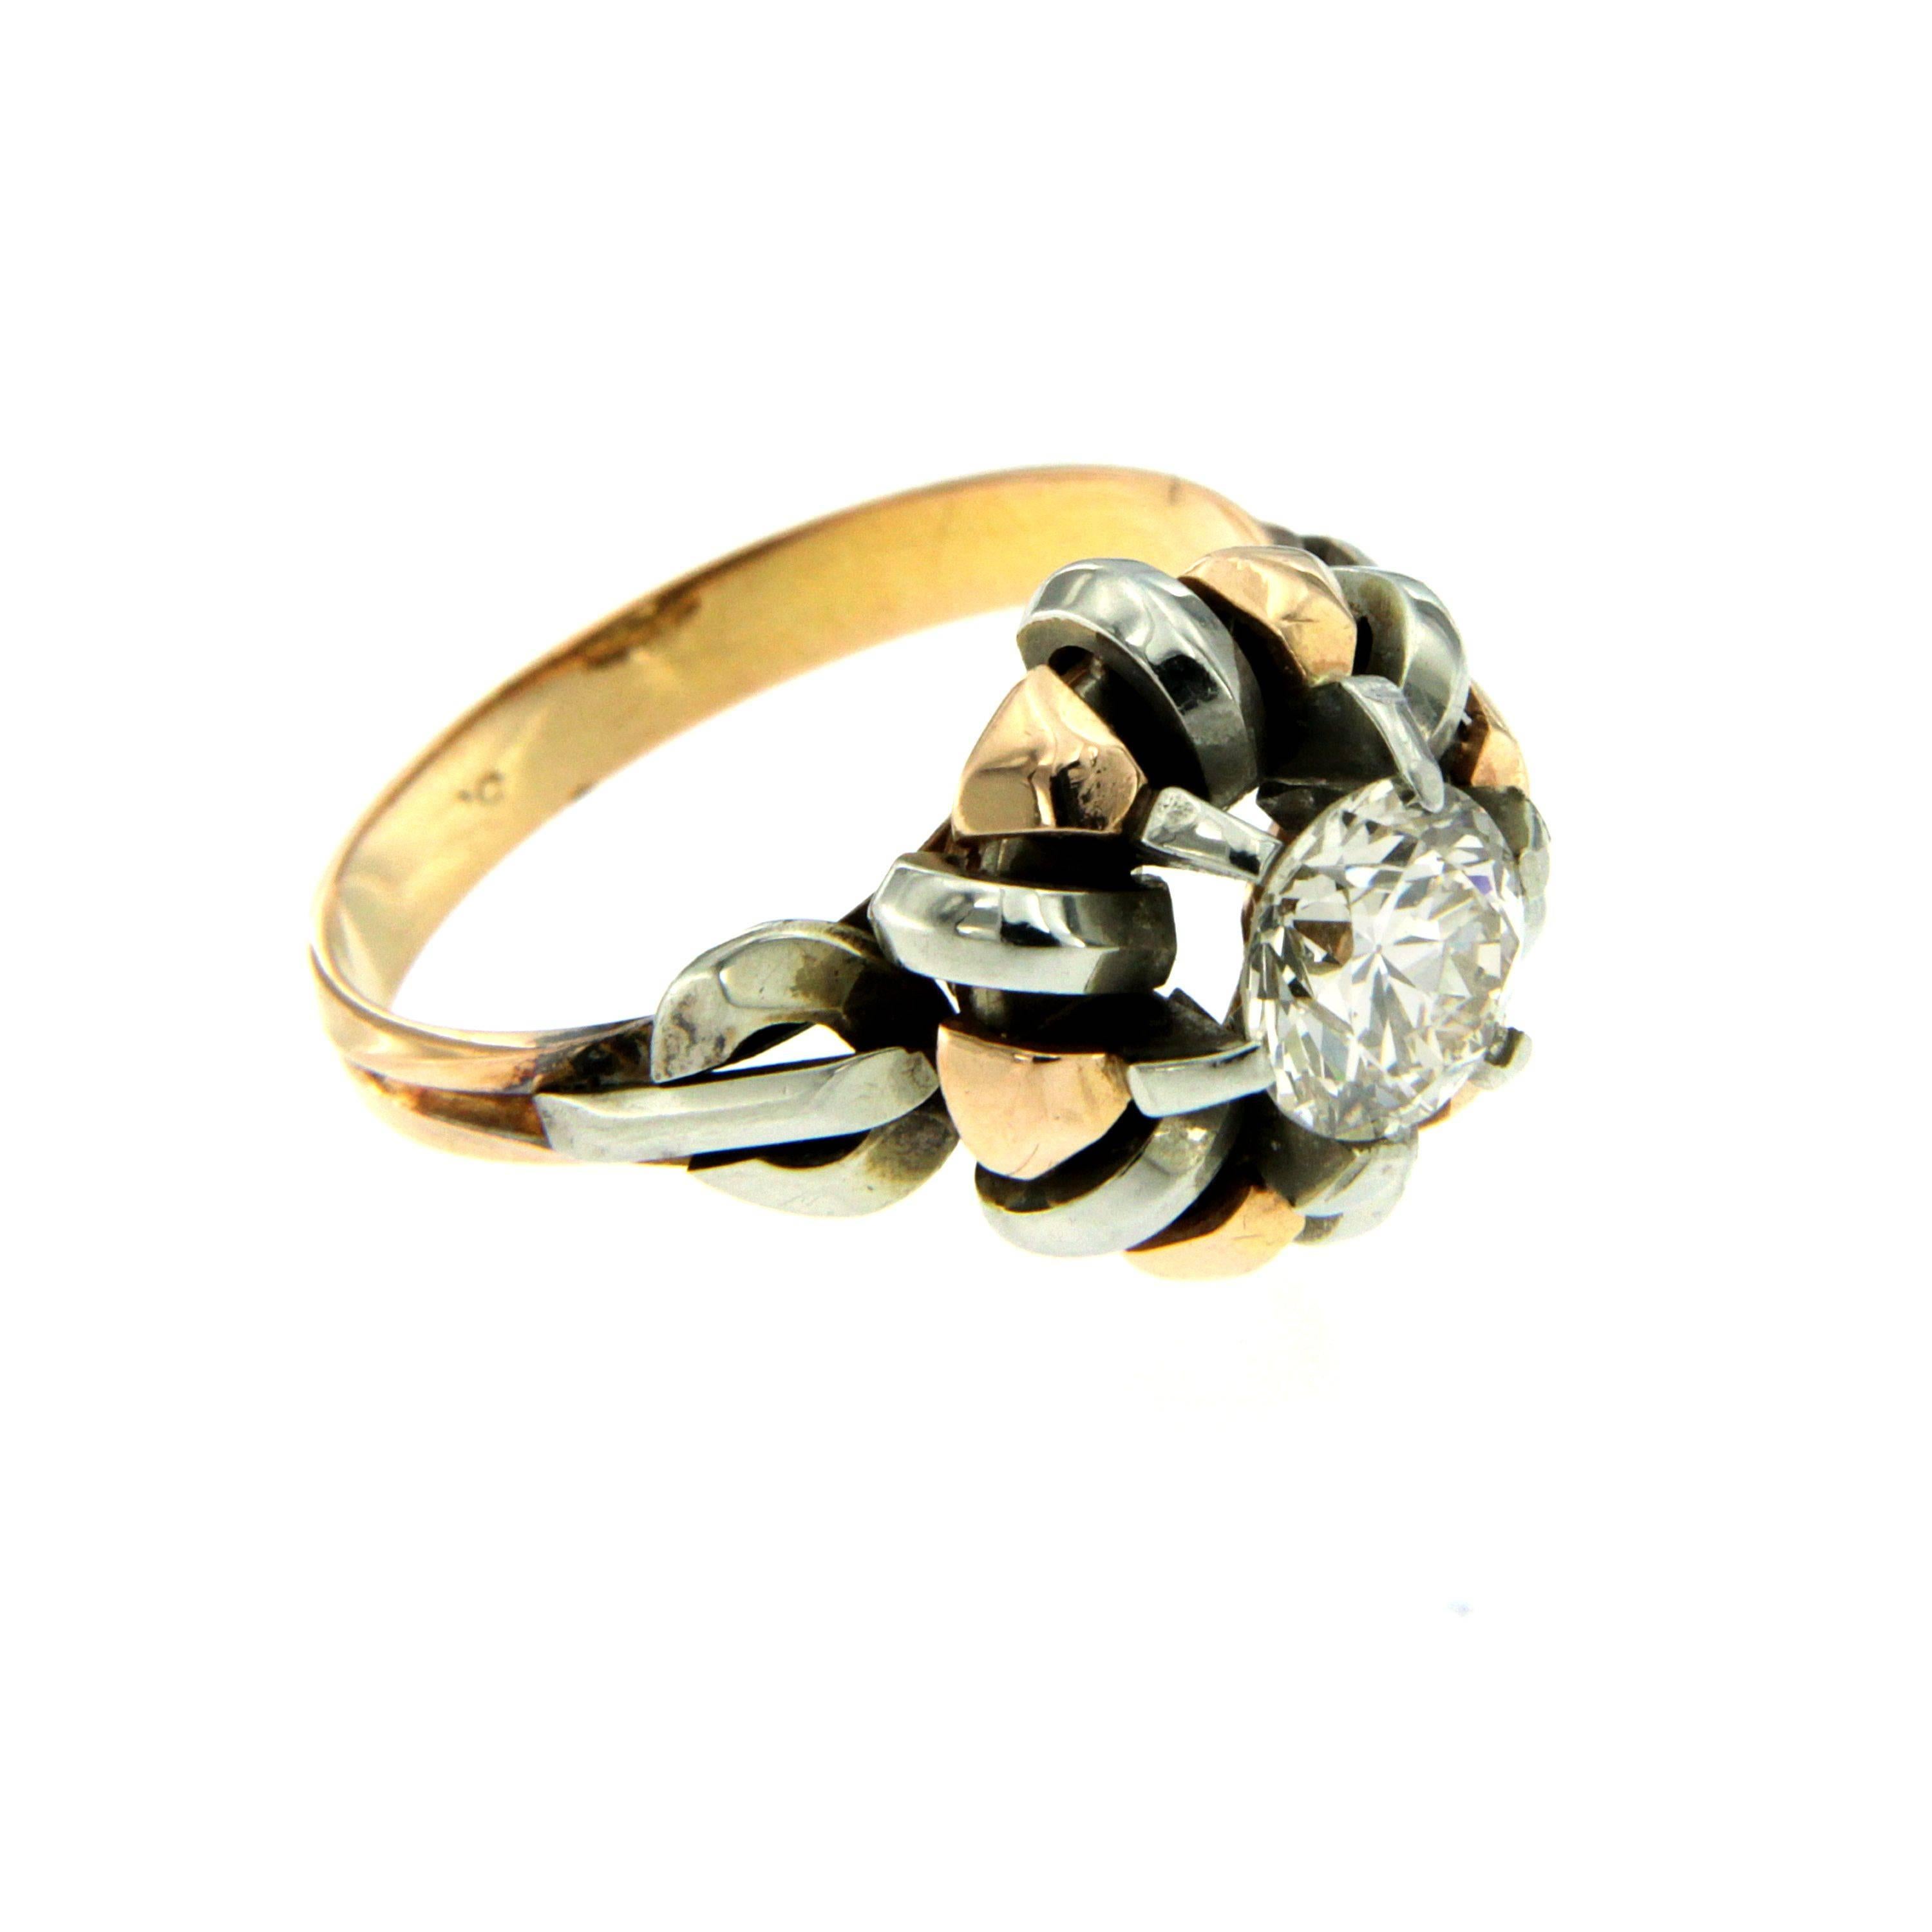 Nice and Elegant ring made of 18k rose and white 18k Gold, made in Italy circa 1950, very suitable for everyday use.

It is set with one exceptional old mine cut Diamond of 0,92 carat Graded H color Vvs really notable the perfect cut of the